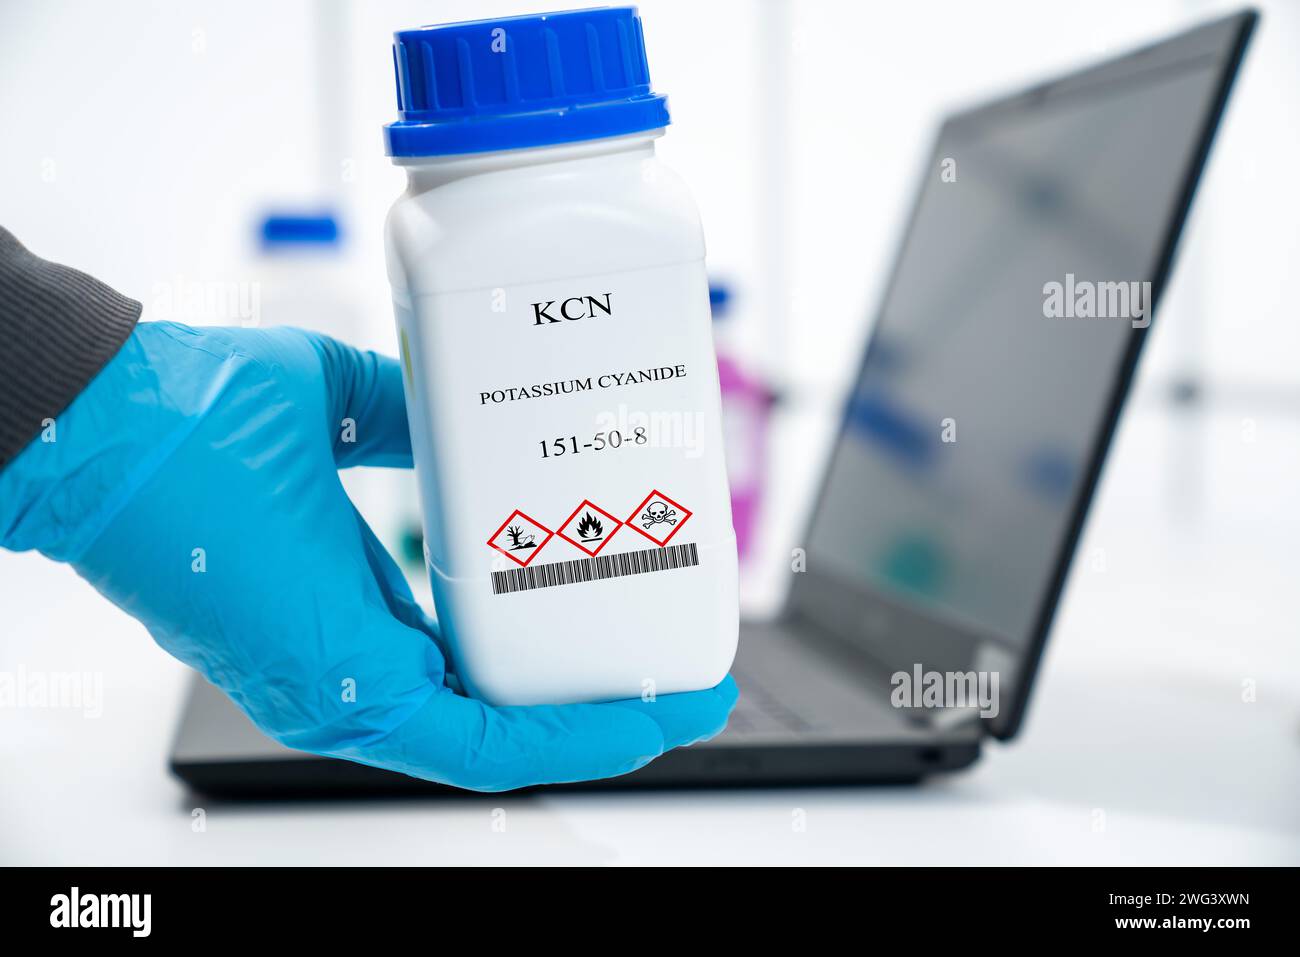 Container of potassium cyanide Stock Photo